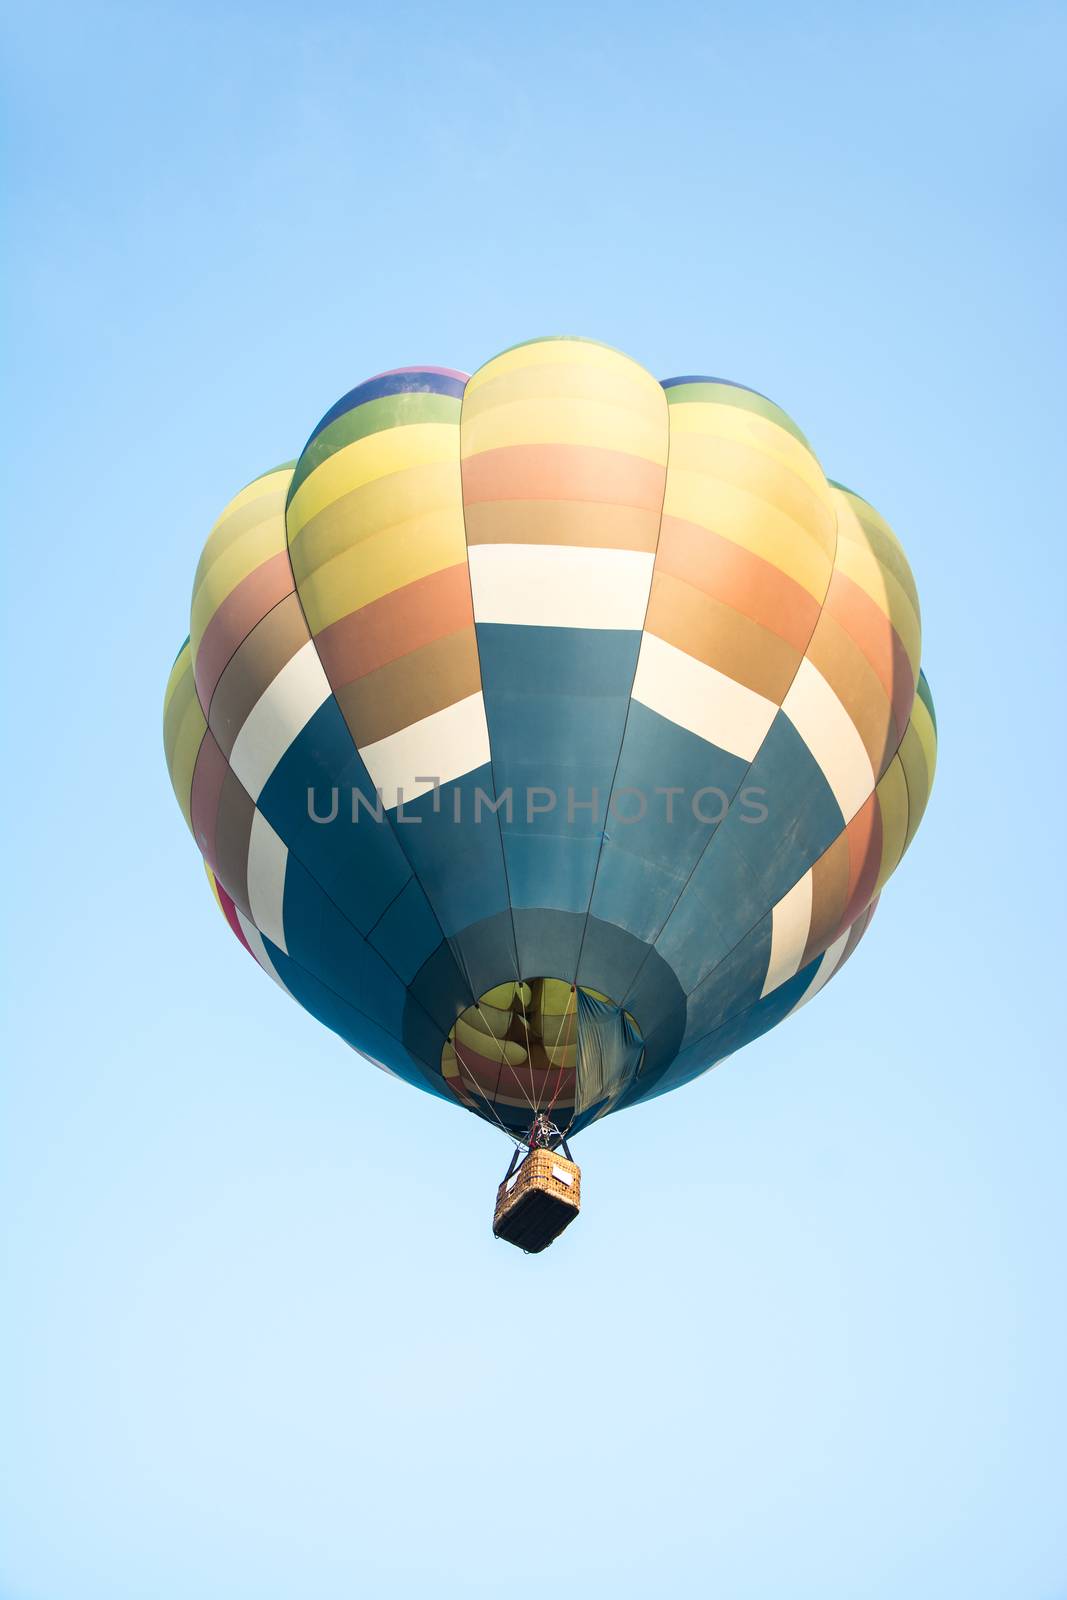 colorful of hot air balloons in blue sky by rakoptonLPN